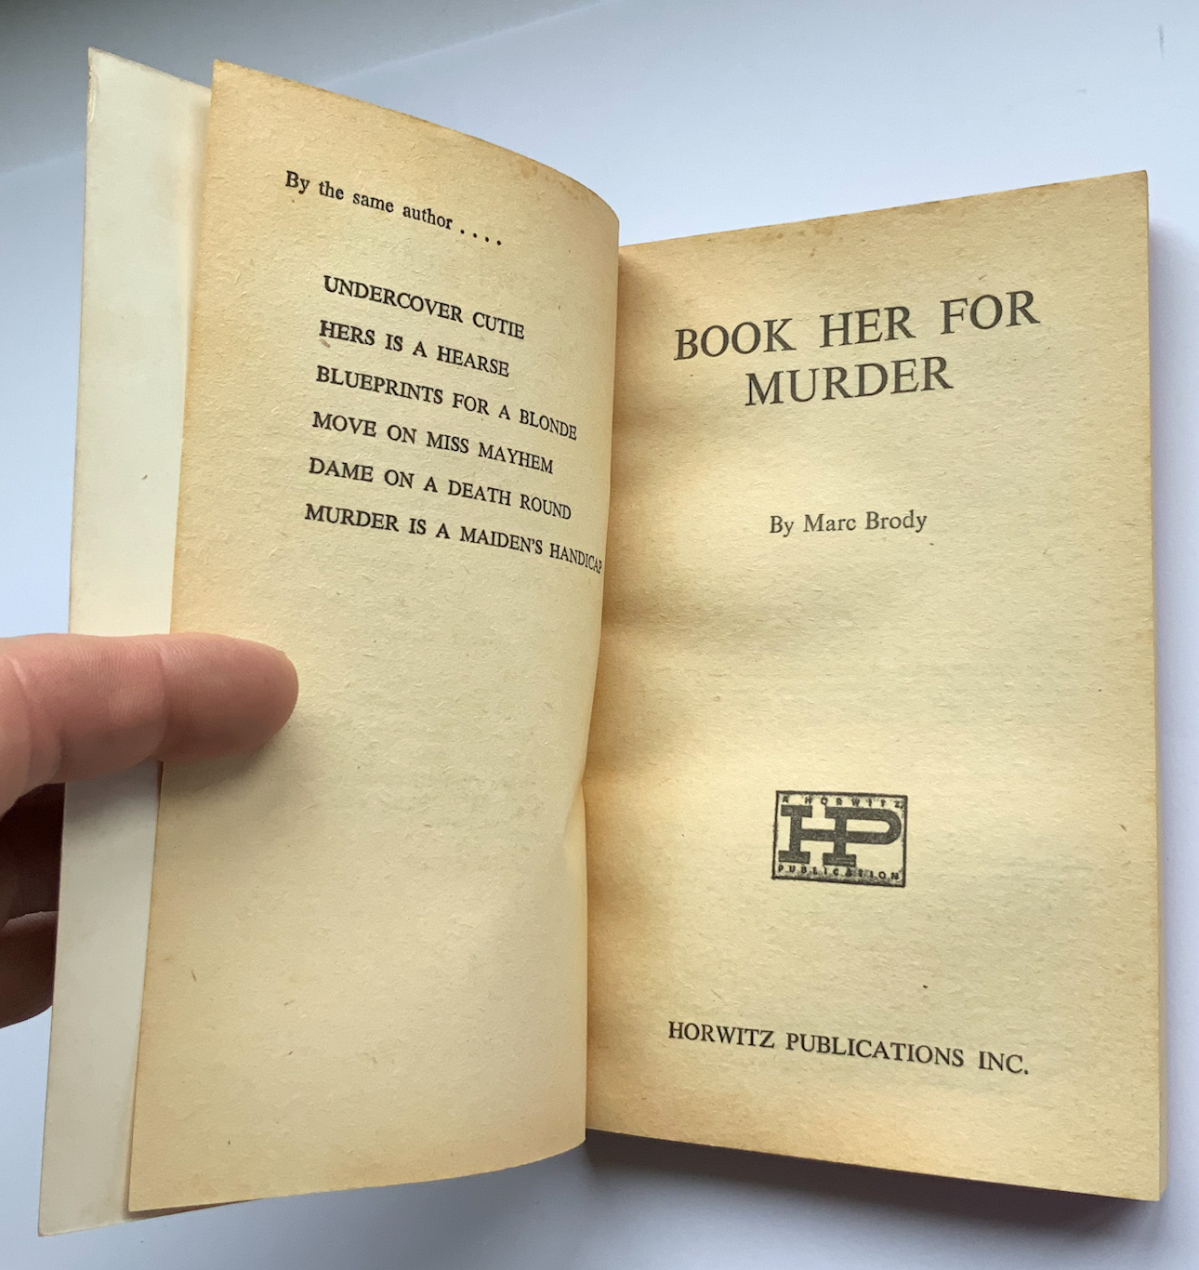 BOOK HER FOR MURDER Australian crime pulp fiction book by Marc Brody 1958